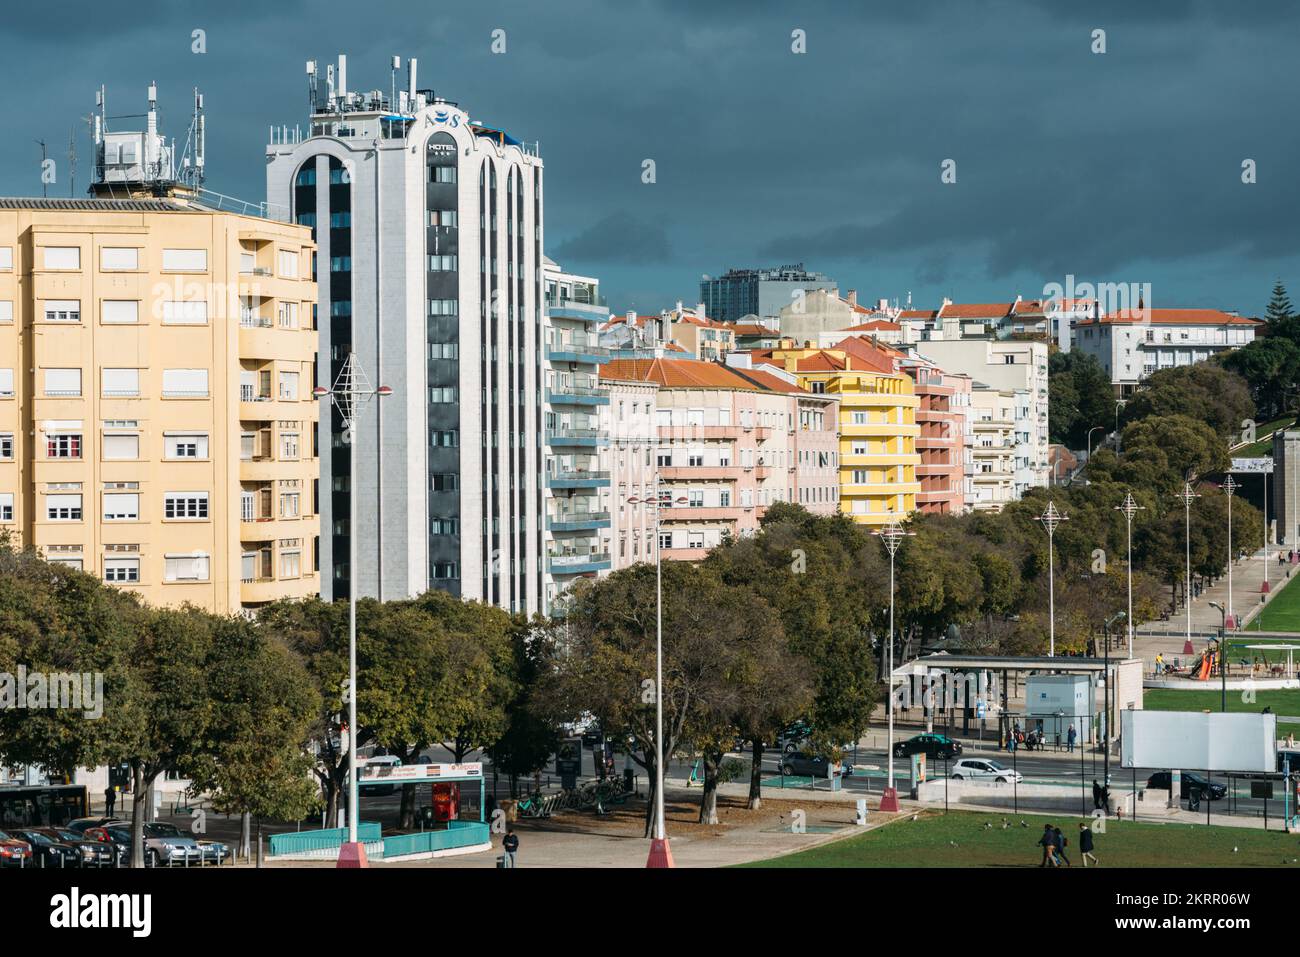 Large grass field at Alameda in Lisbon, Portugal with residential buildings Stock Photo